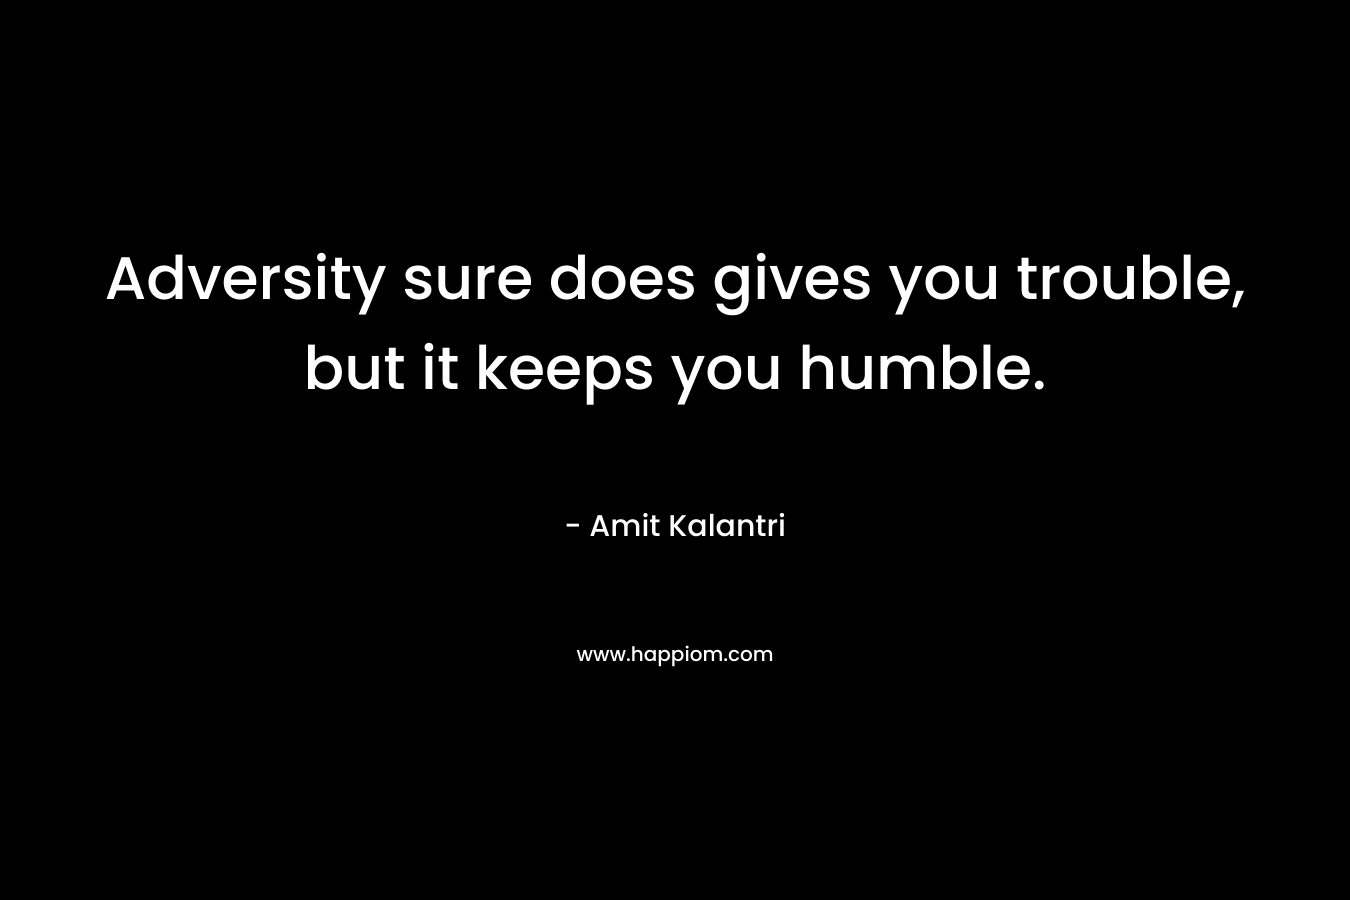 Adversity sure does gives you trouble, but it keeps you humble.